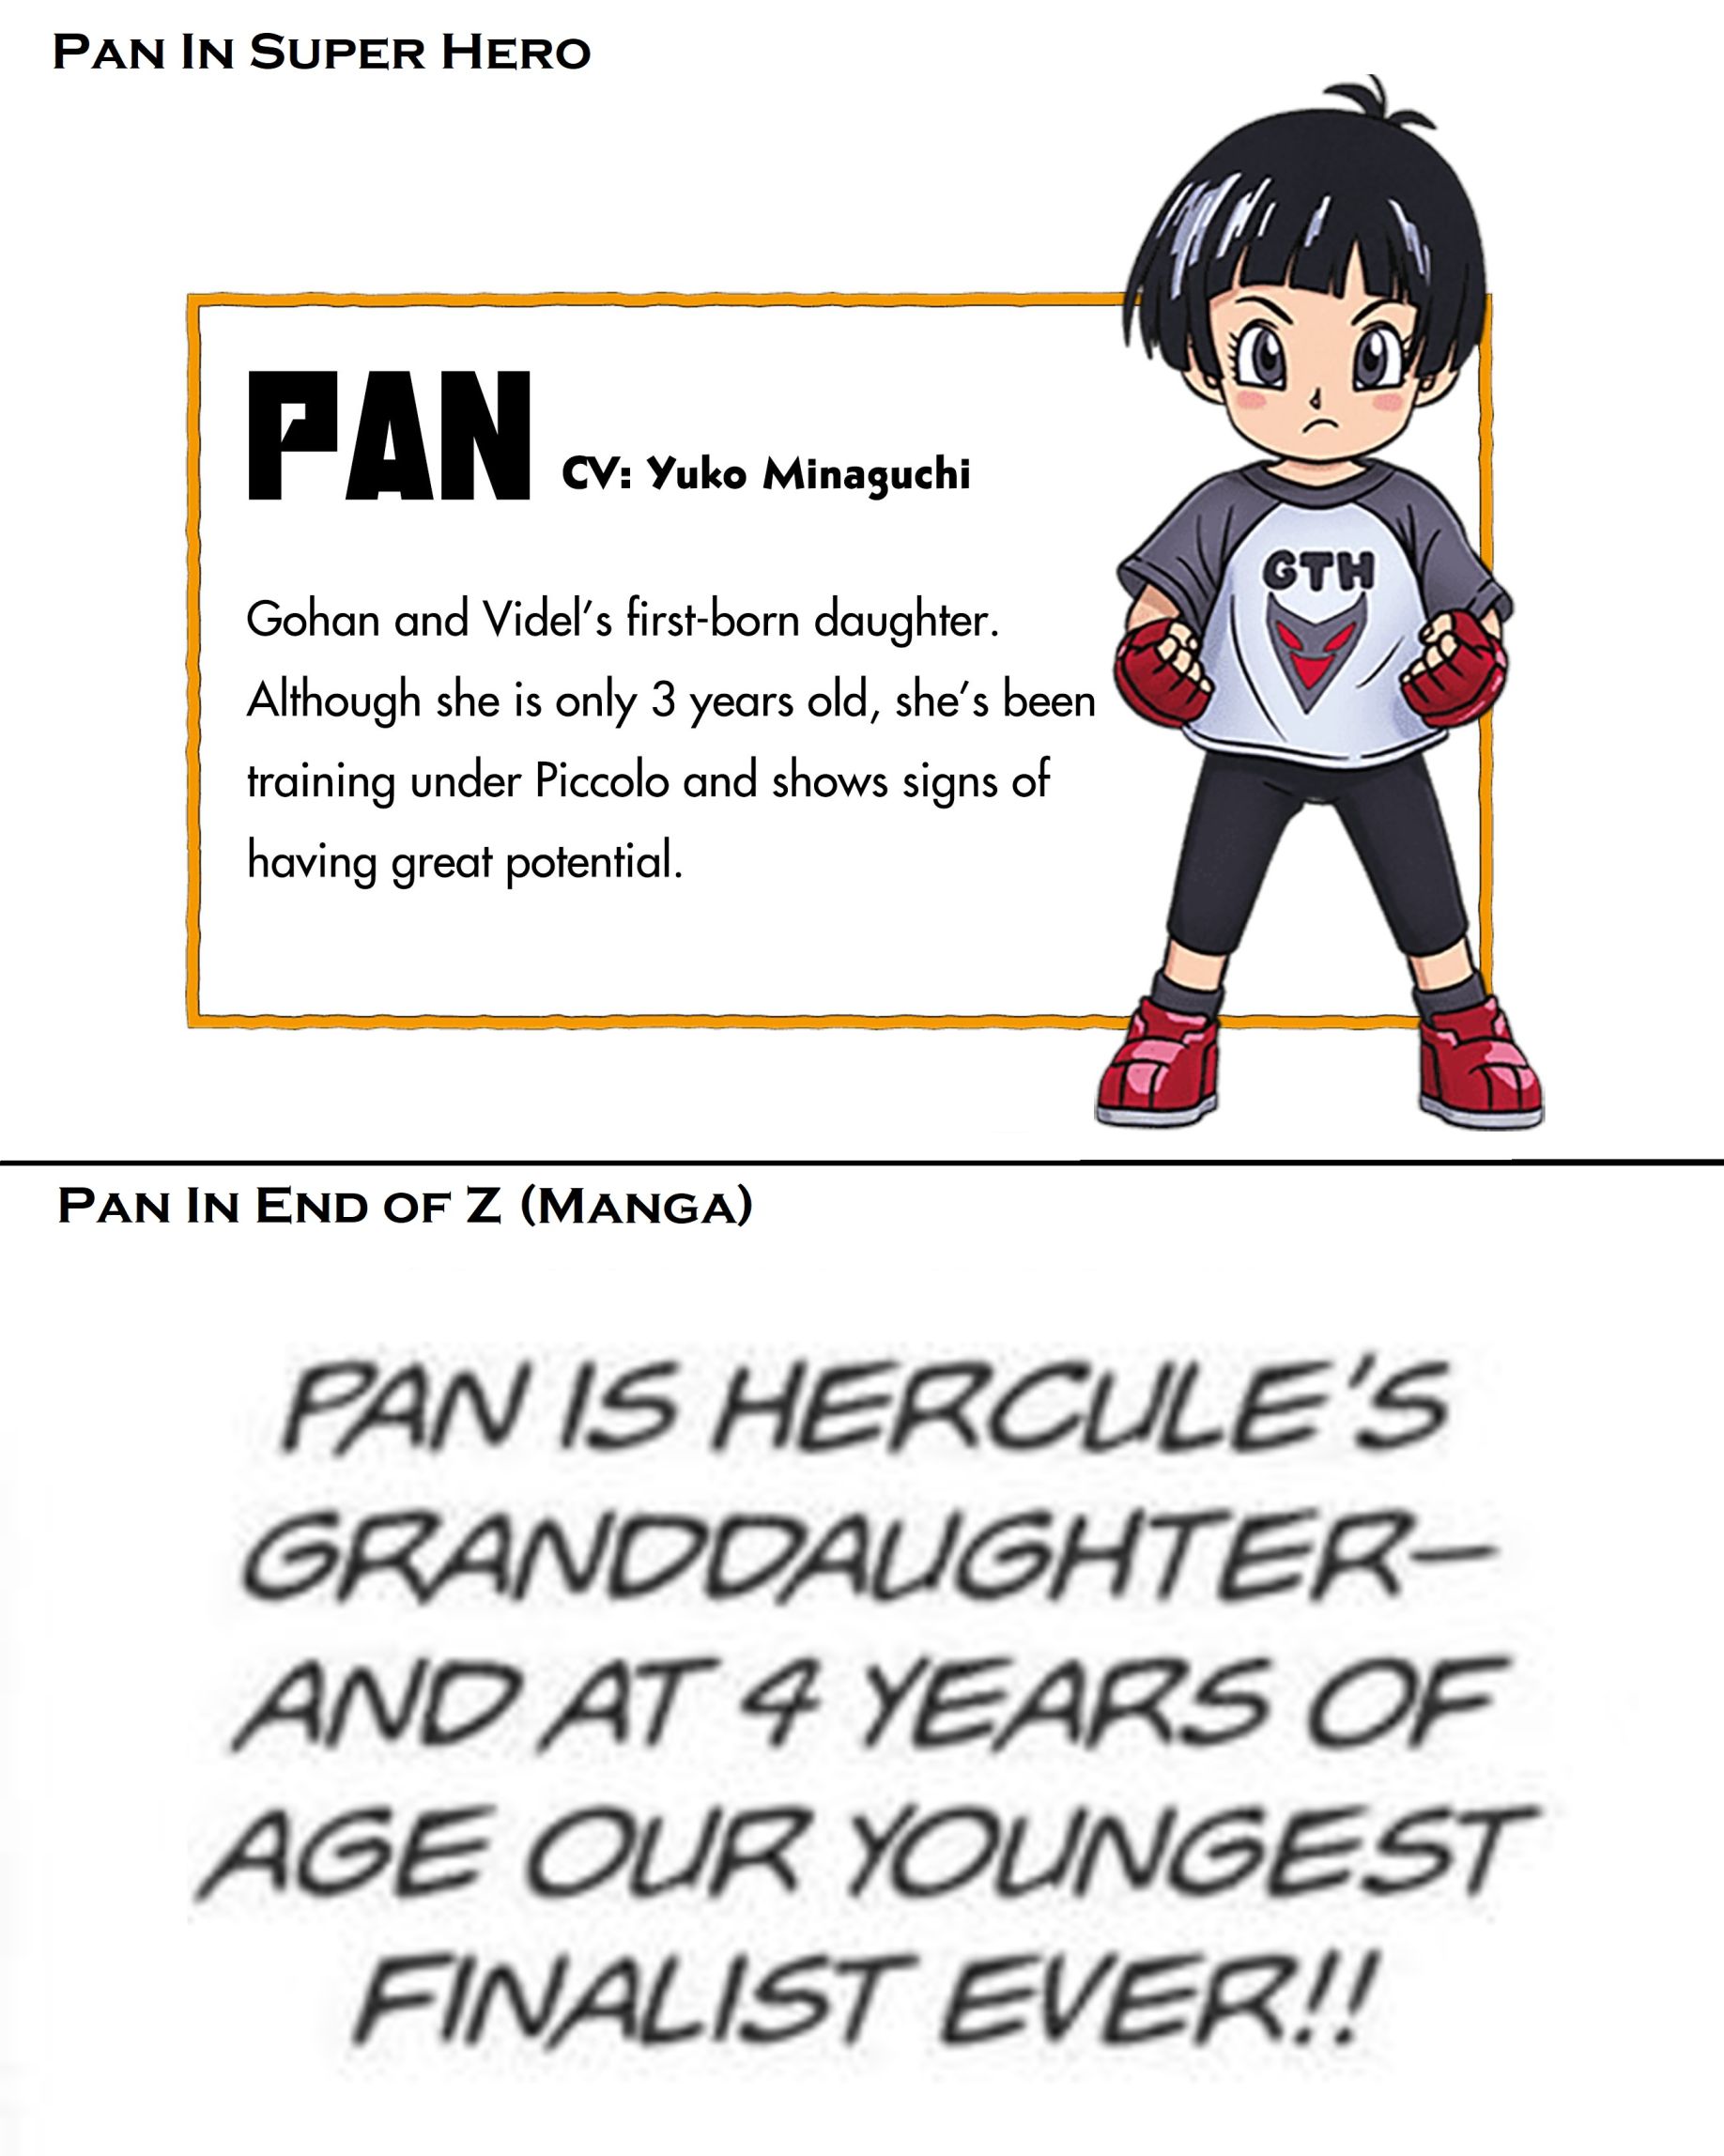 Pan's age in Dragon Ball Super: Super Hero and in End of Z